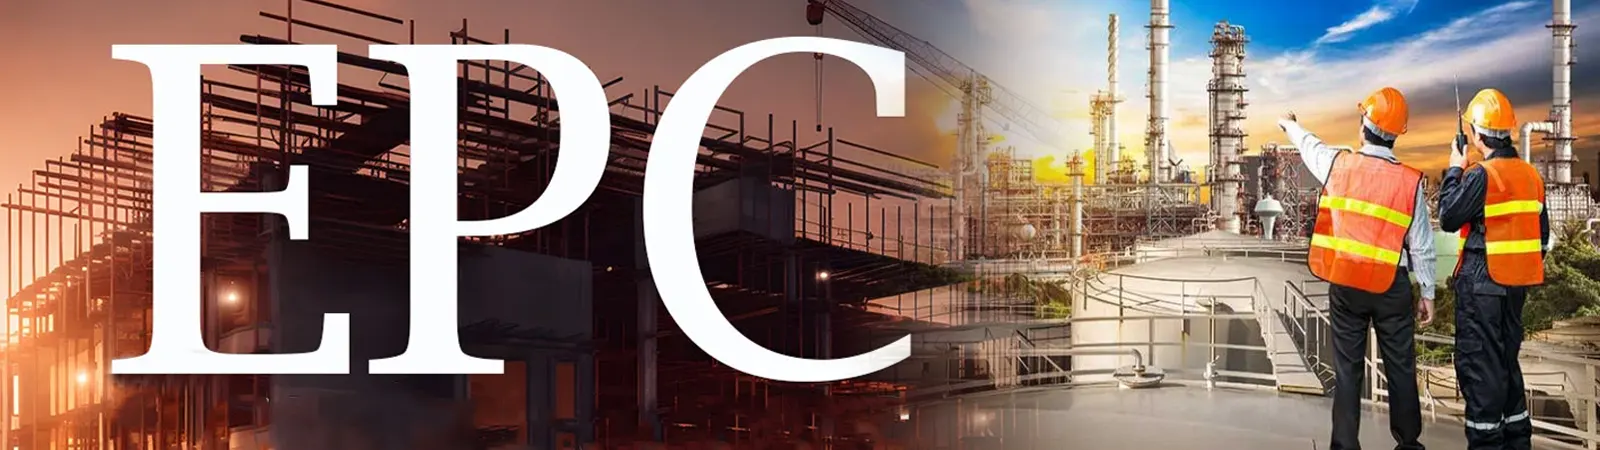 How Epc Services Optimized Construction Cost for Safety Solutions in Industrial Projects